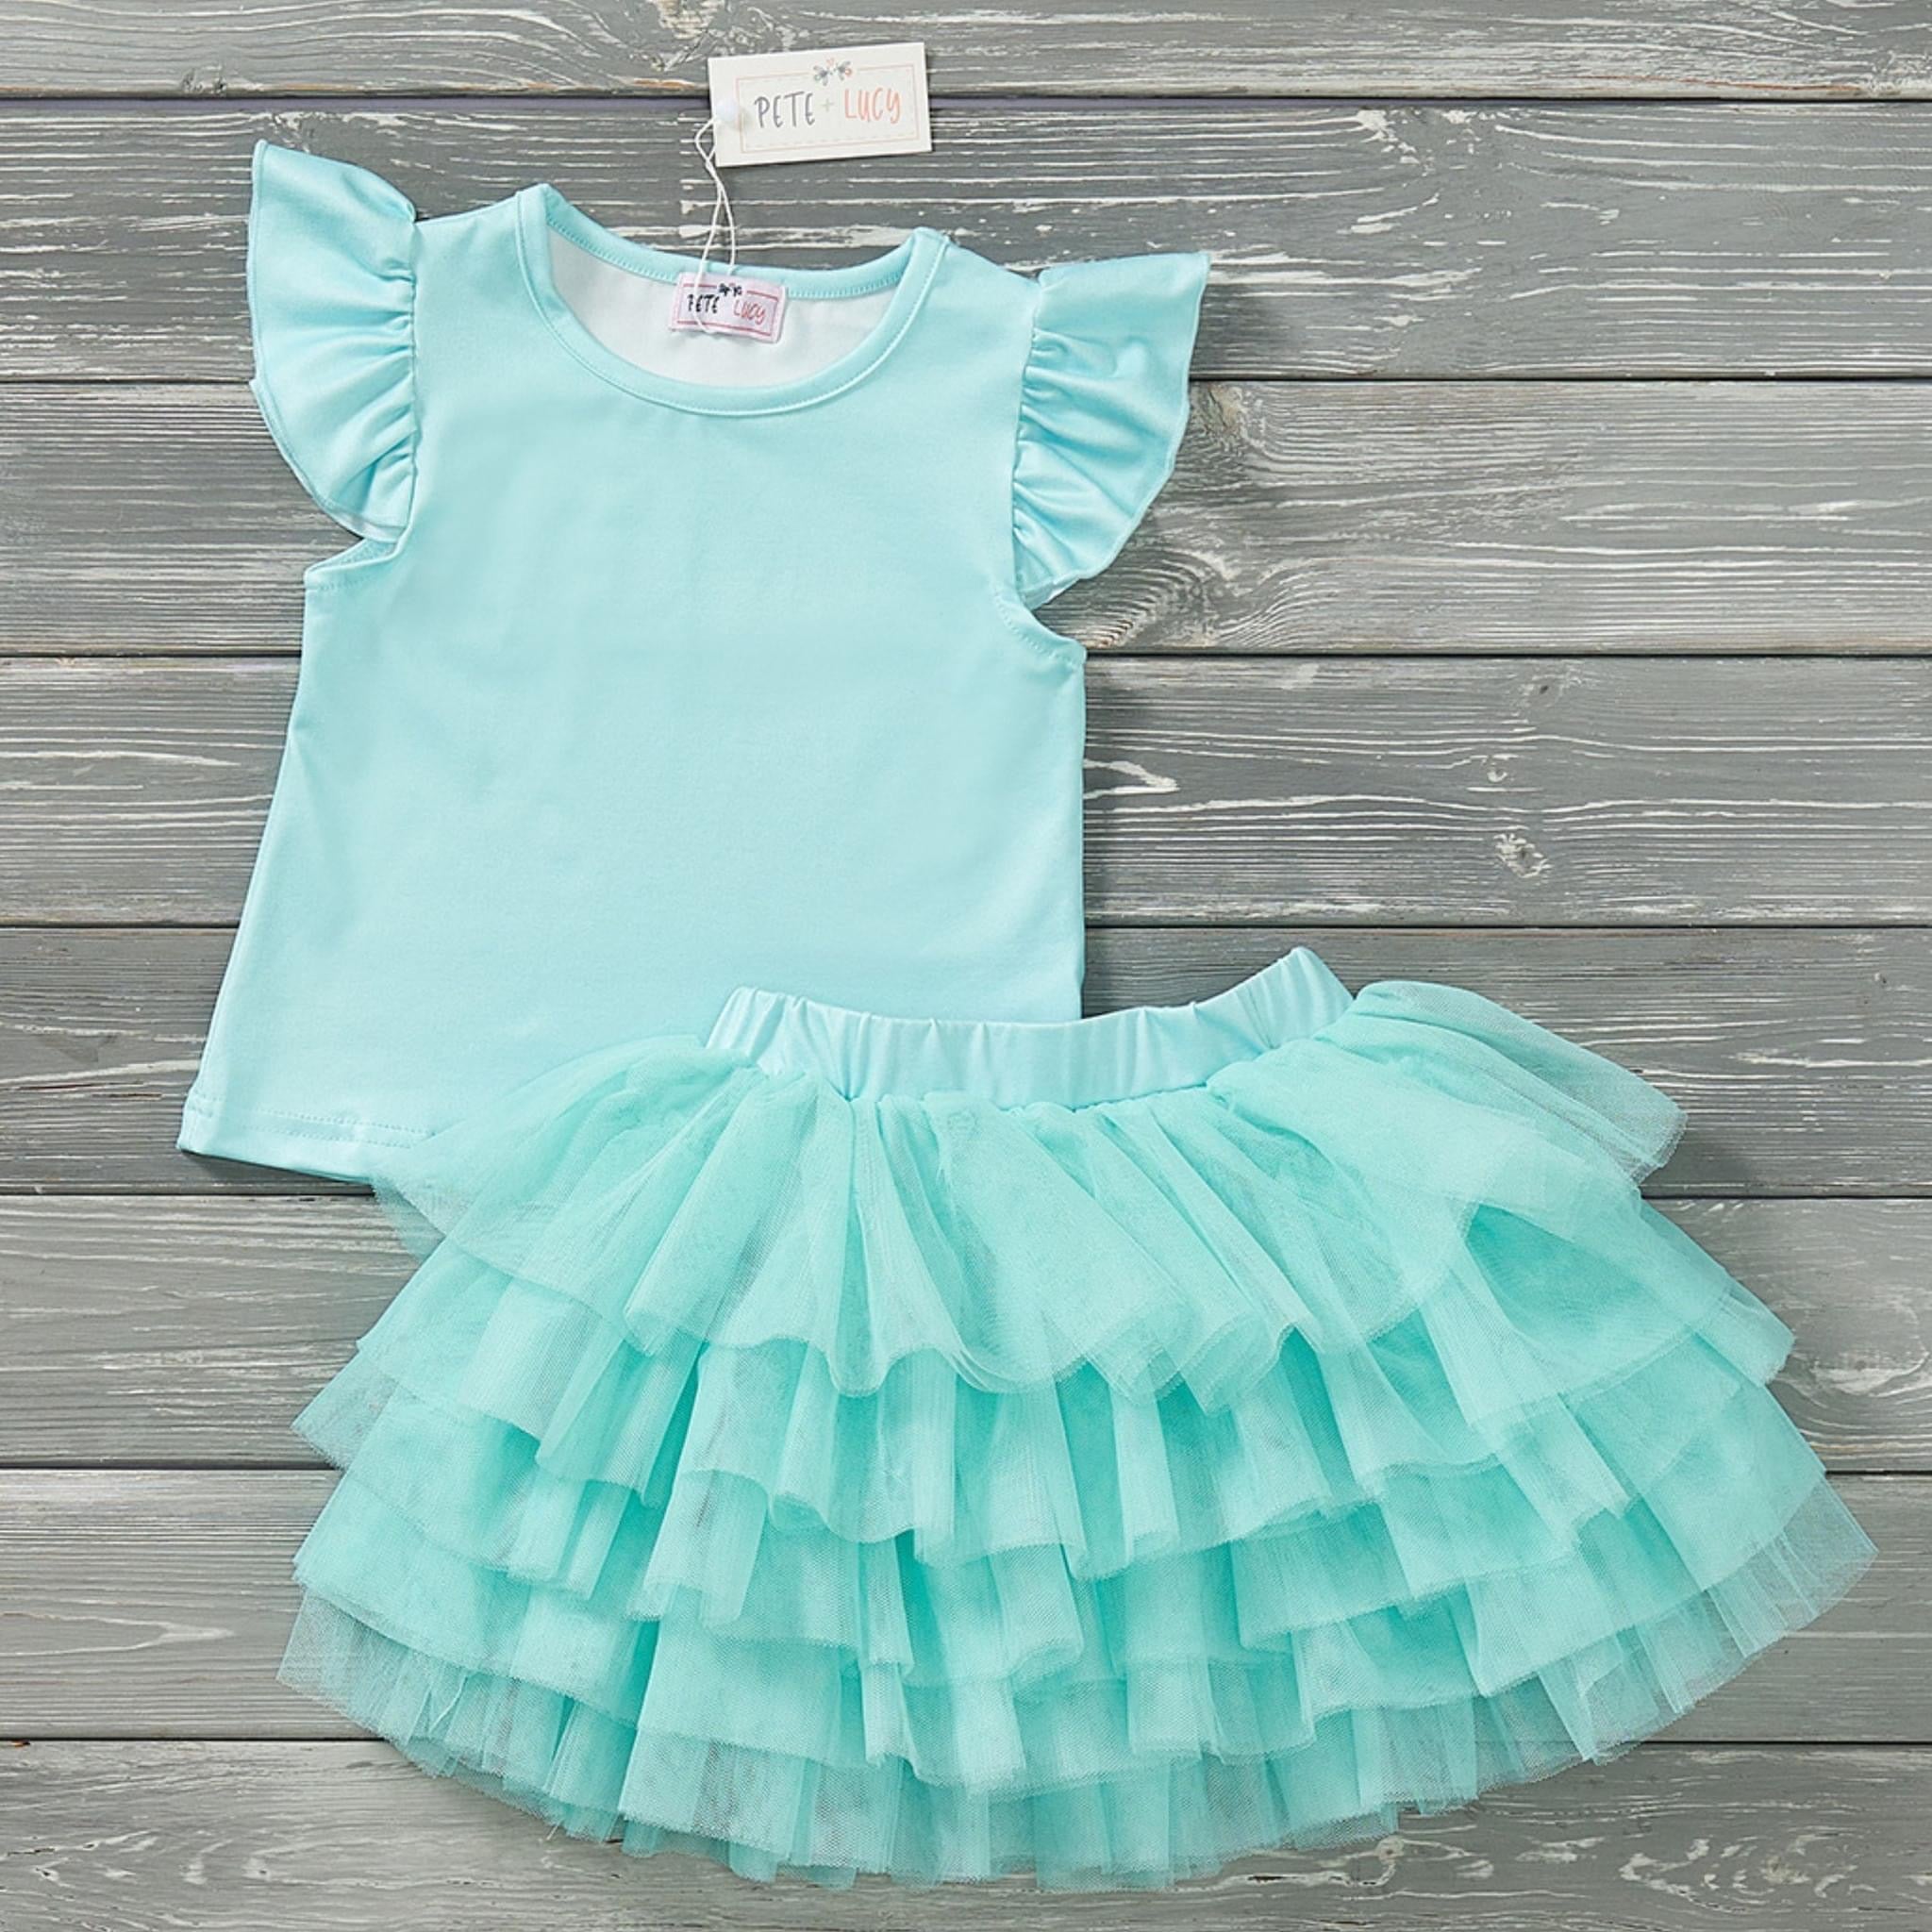 Spectacular Seafoam Tulle Dress by Pete and Lucy